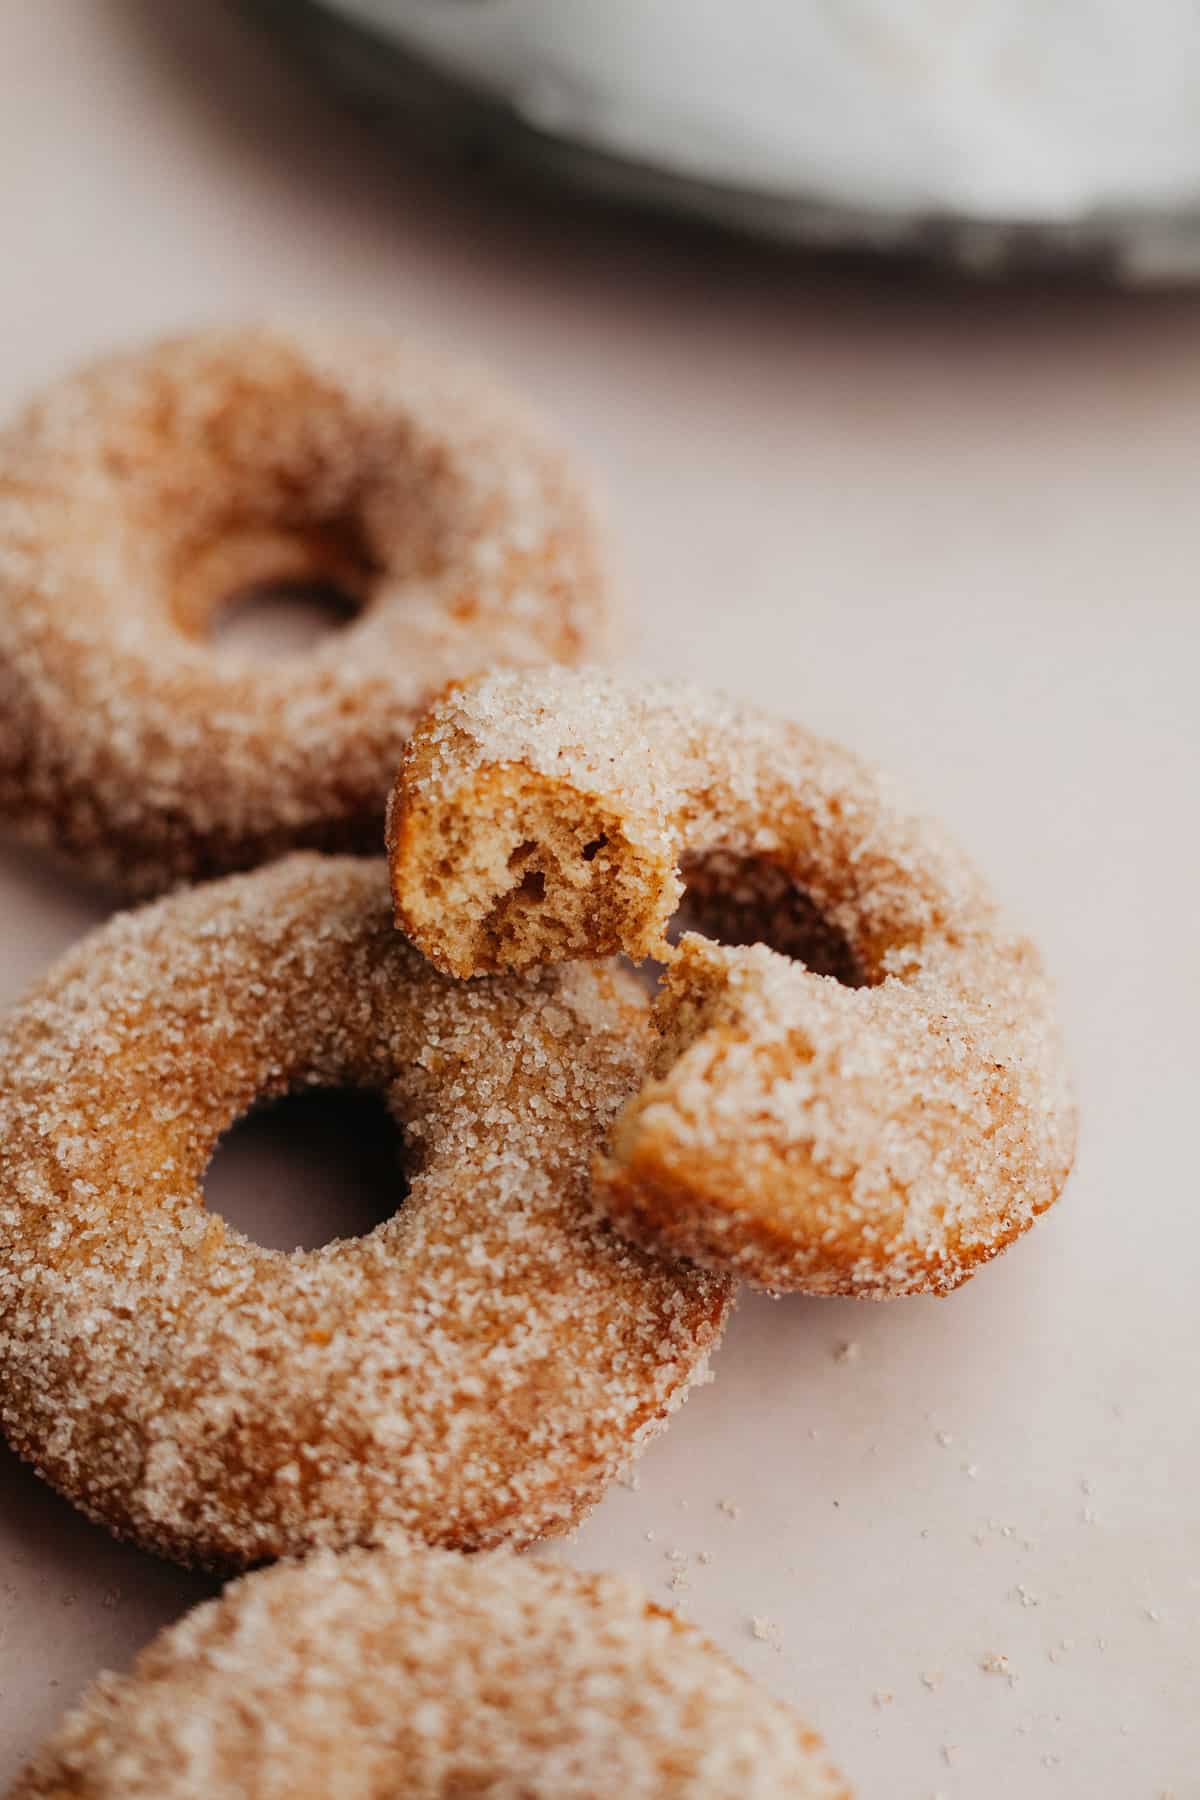 several cinnamon sugar doughnuts, one is resting on top with a bite taken out of it.